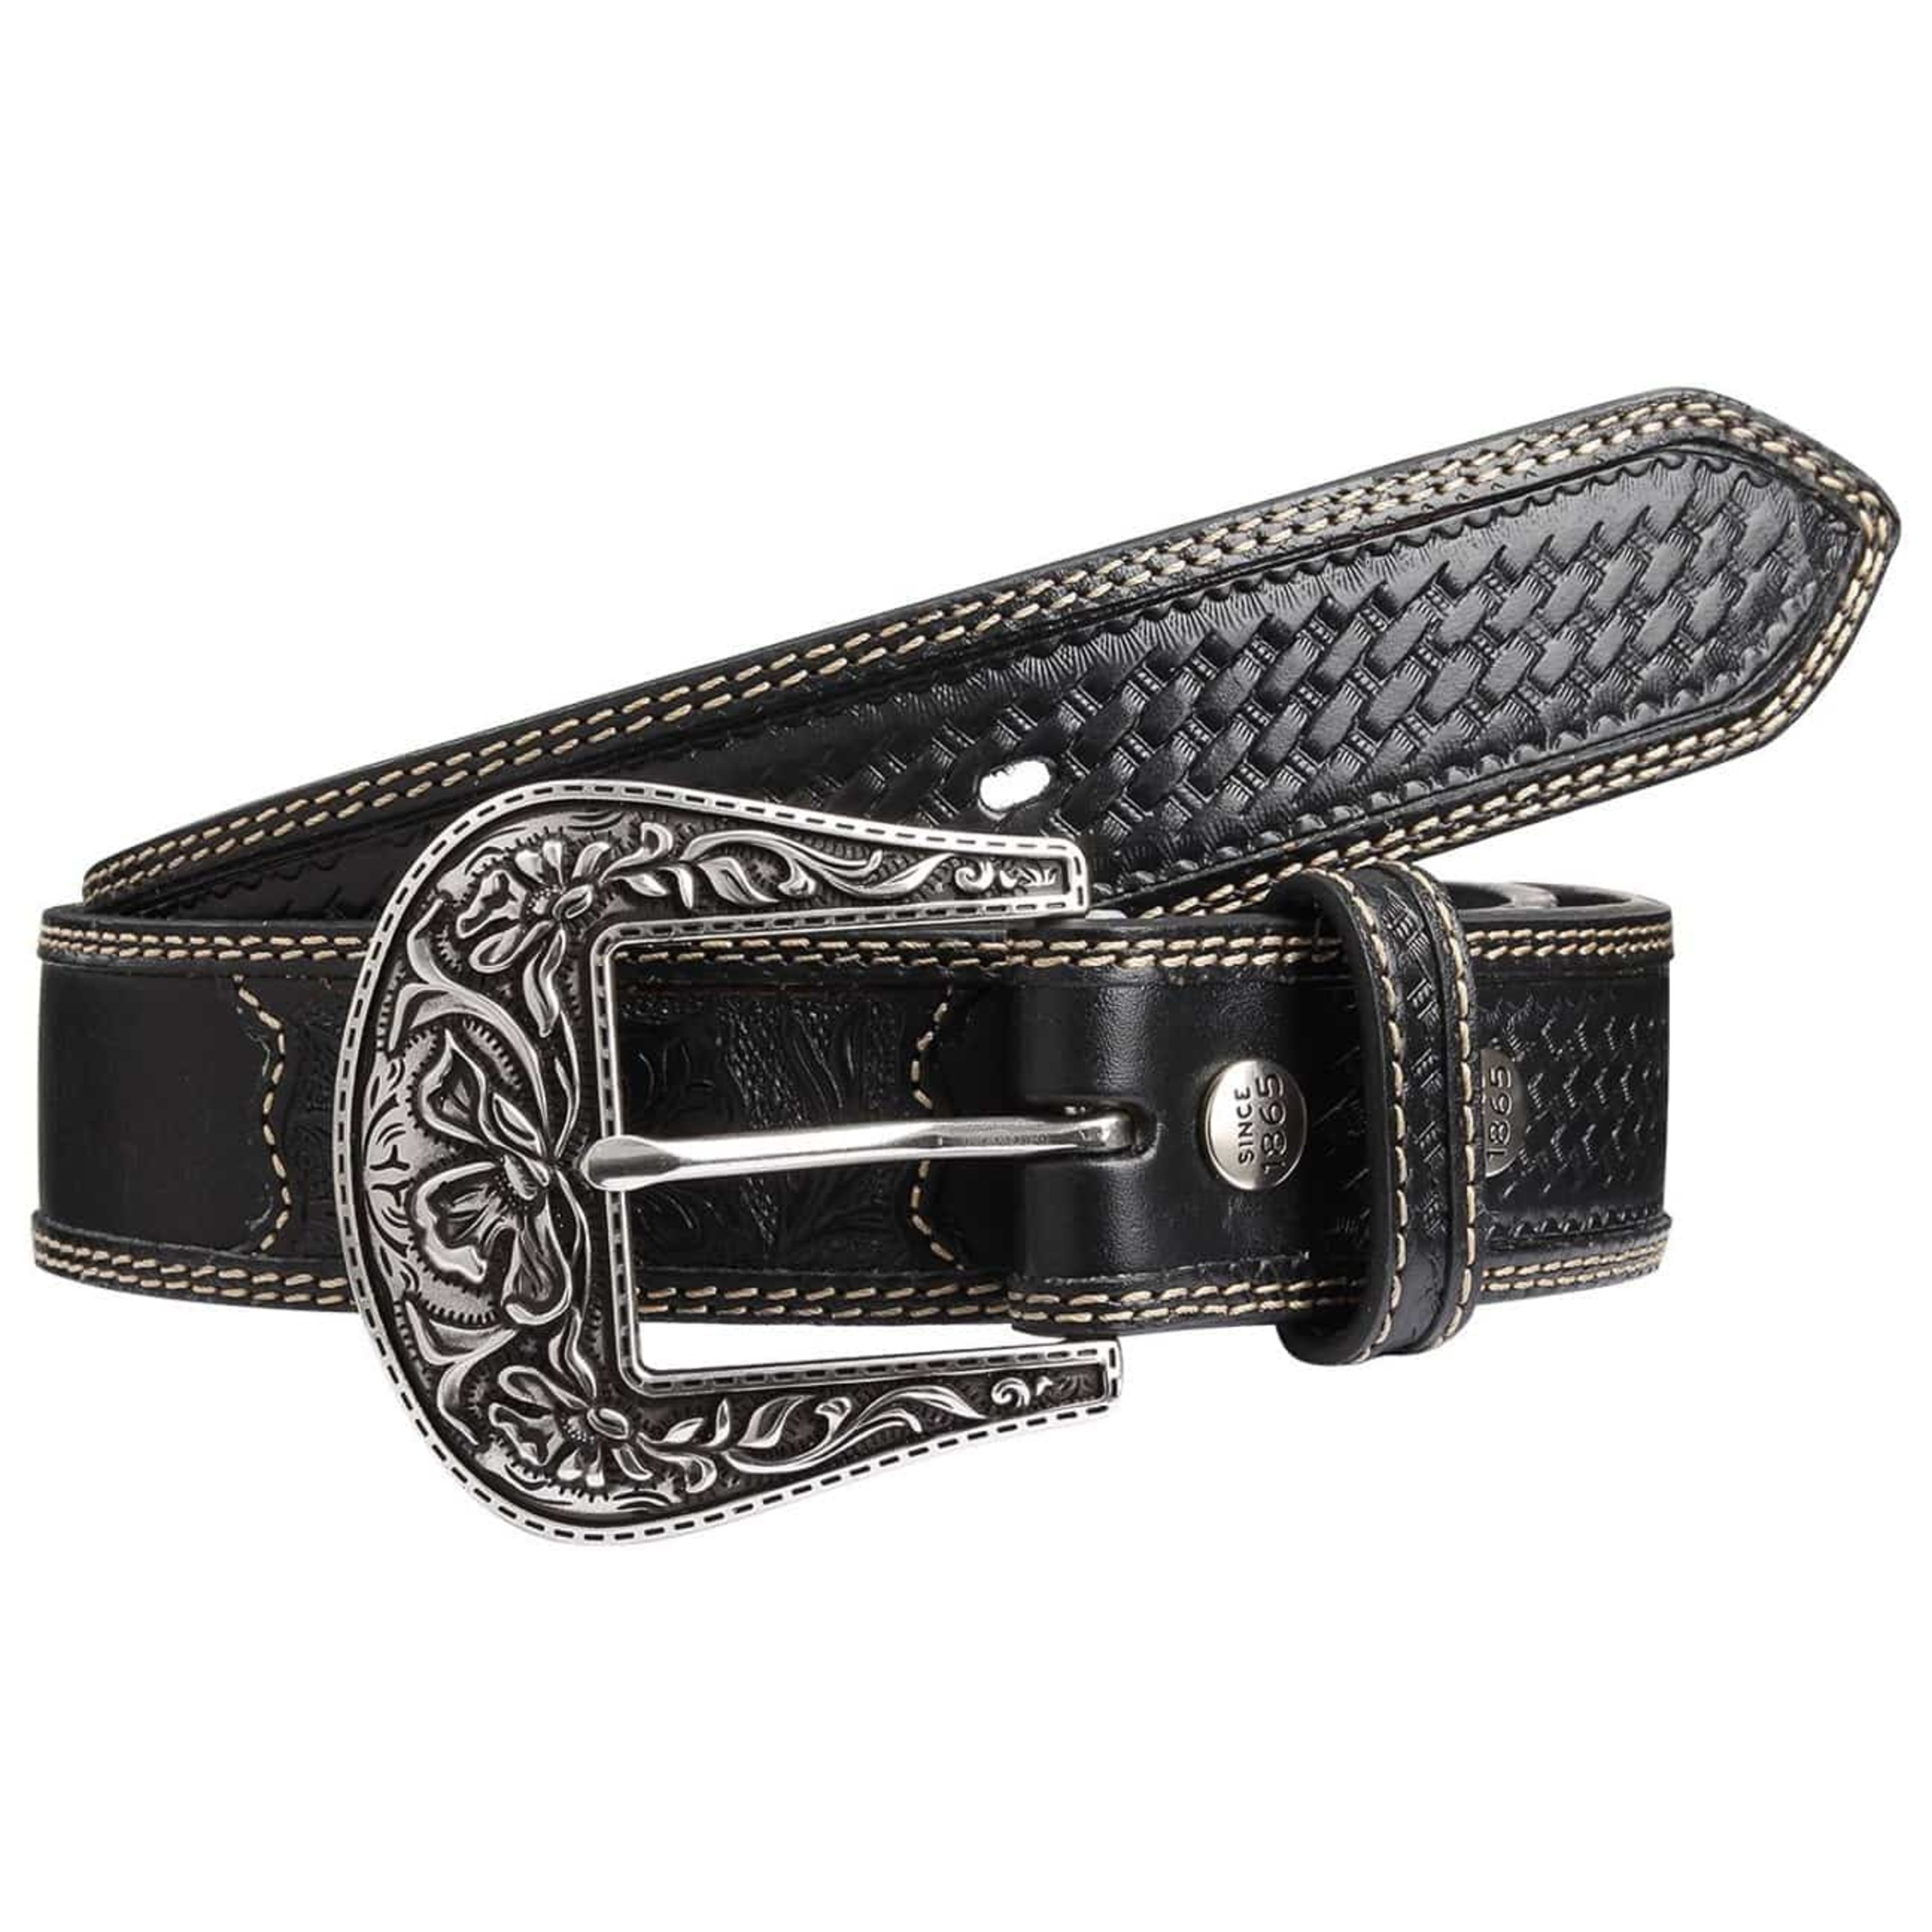 Columbia Leather Belt by Stetson - 69,00